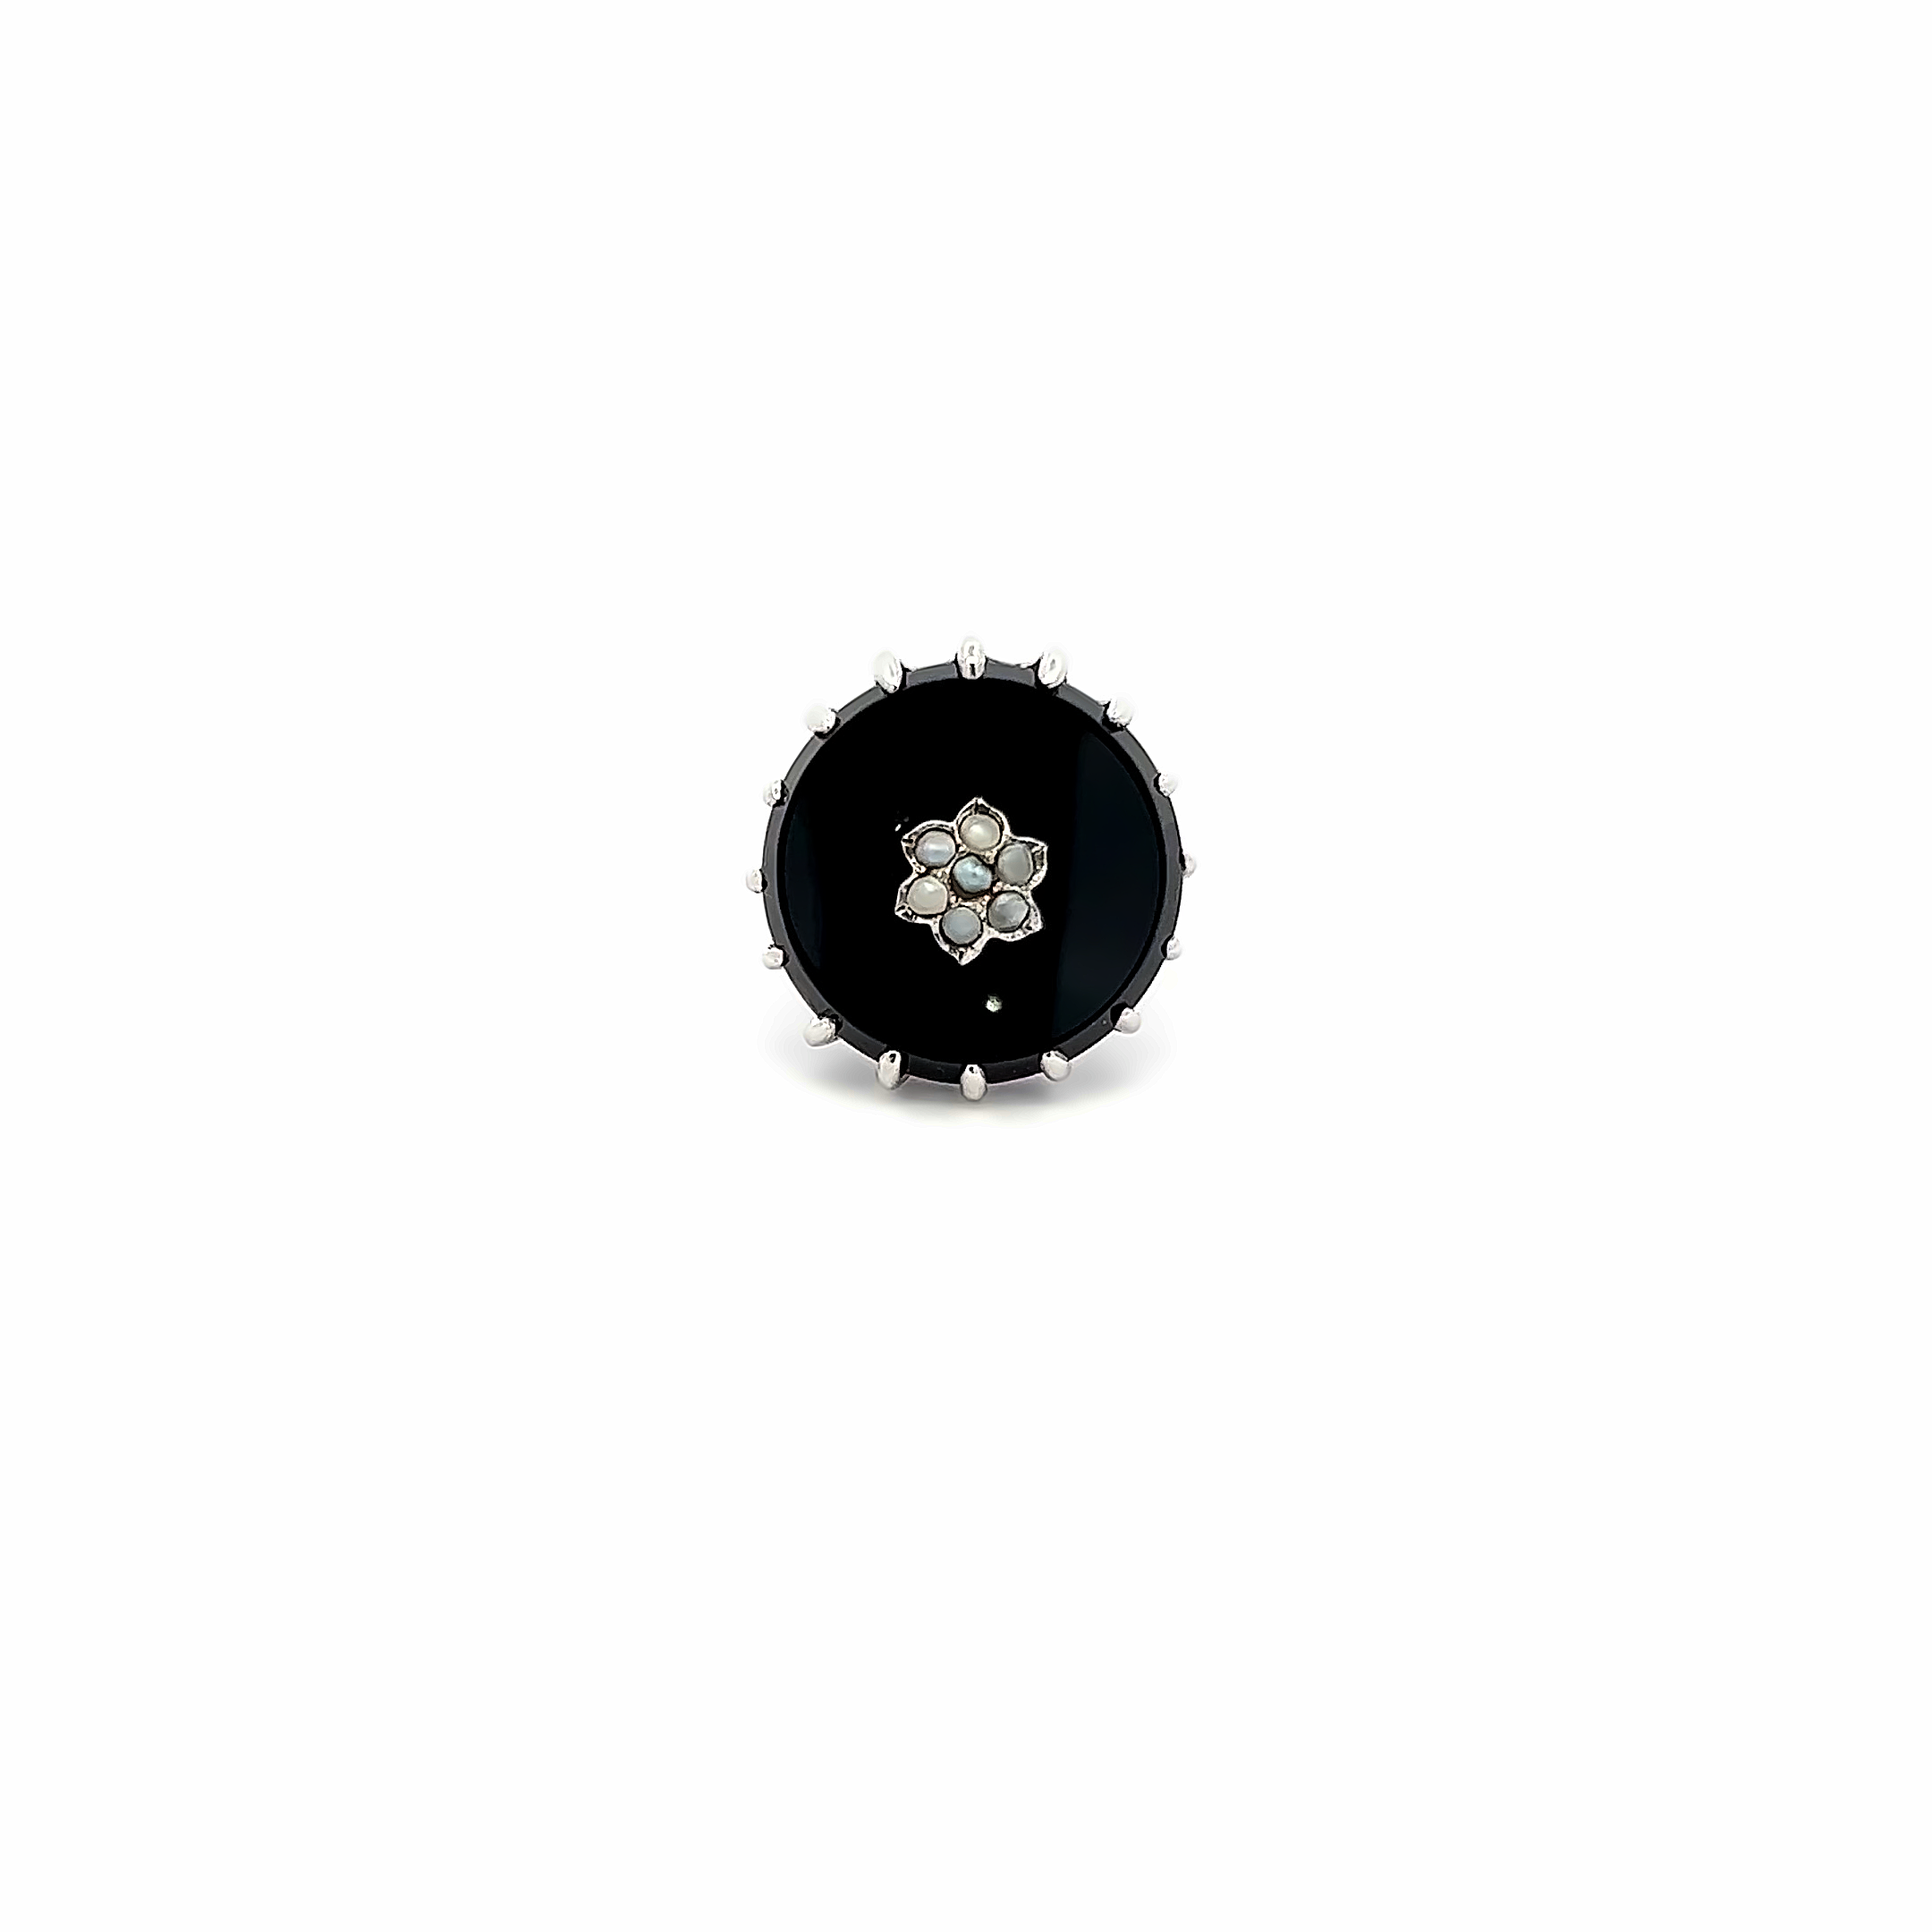 White 14 Karat Antique Ring With 7 seed pearls in the center of one black onyx plate.